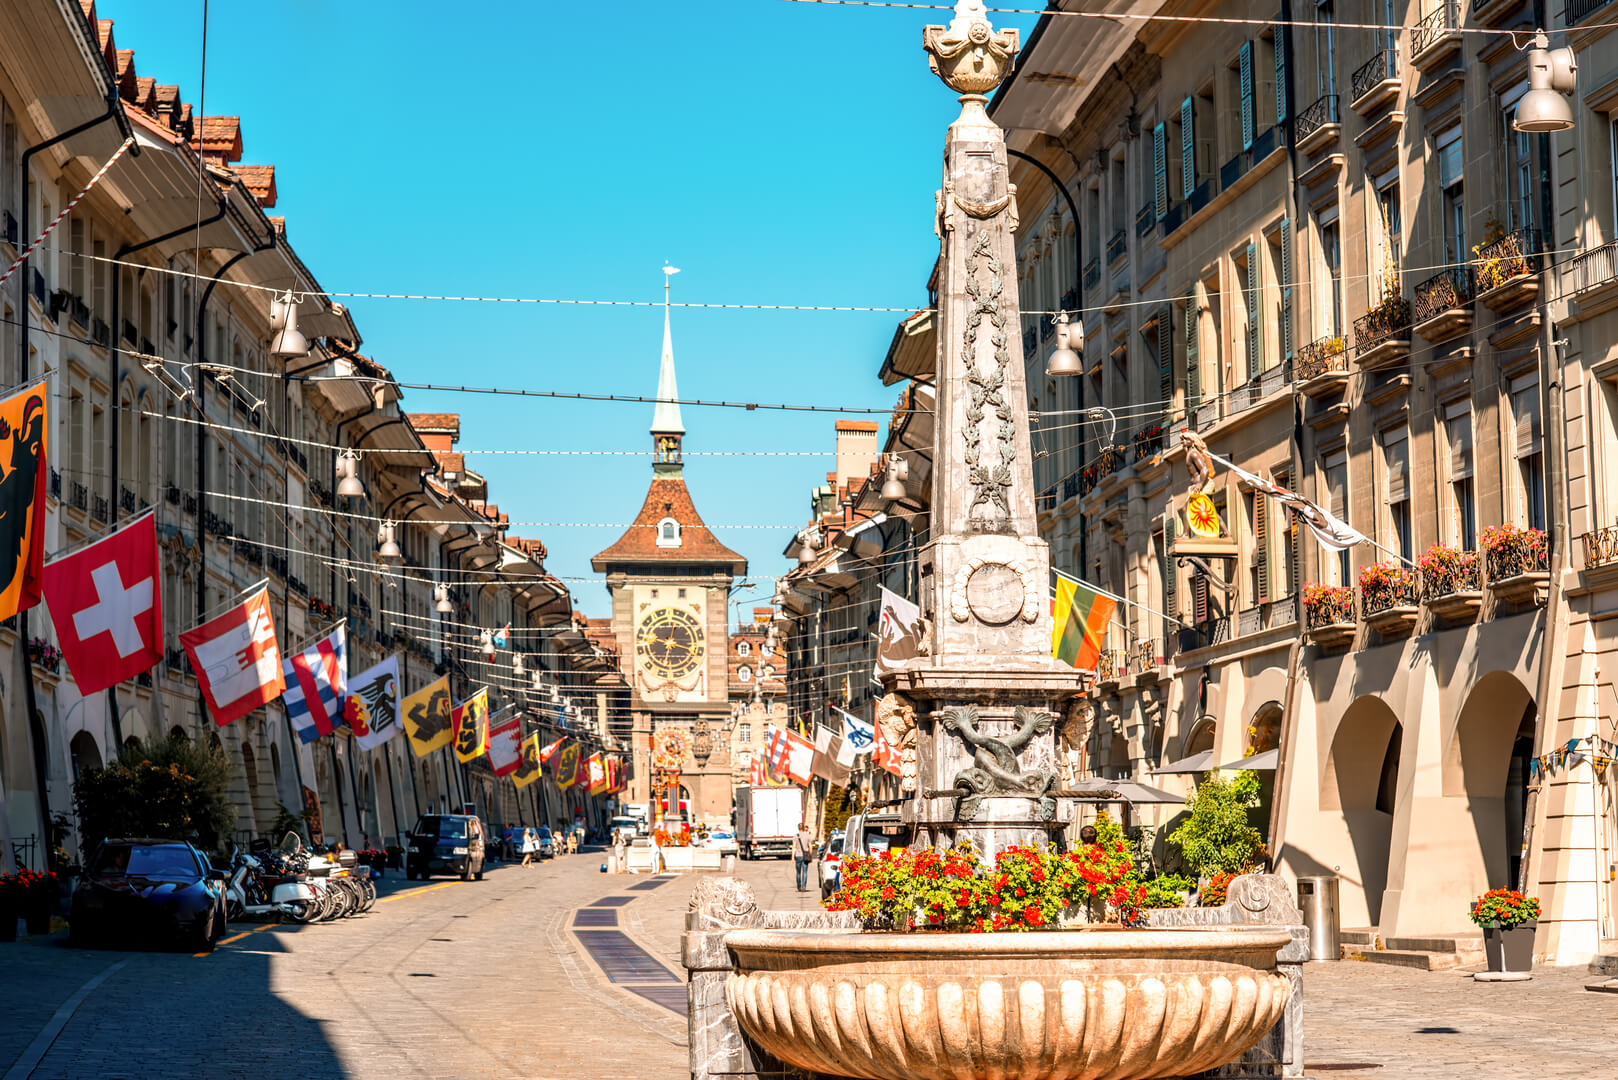 Street view on Kramgasse with fountain and clock tower in the old town of Bern city. It is a popular shopping street and medieval city centre of Bern, Switzerland